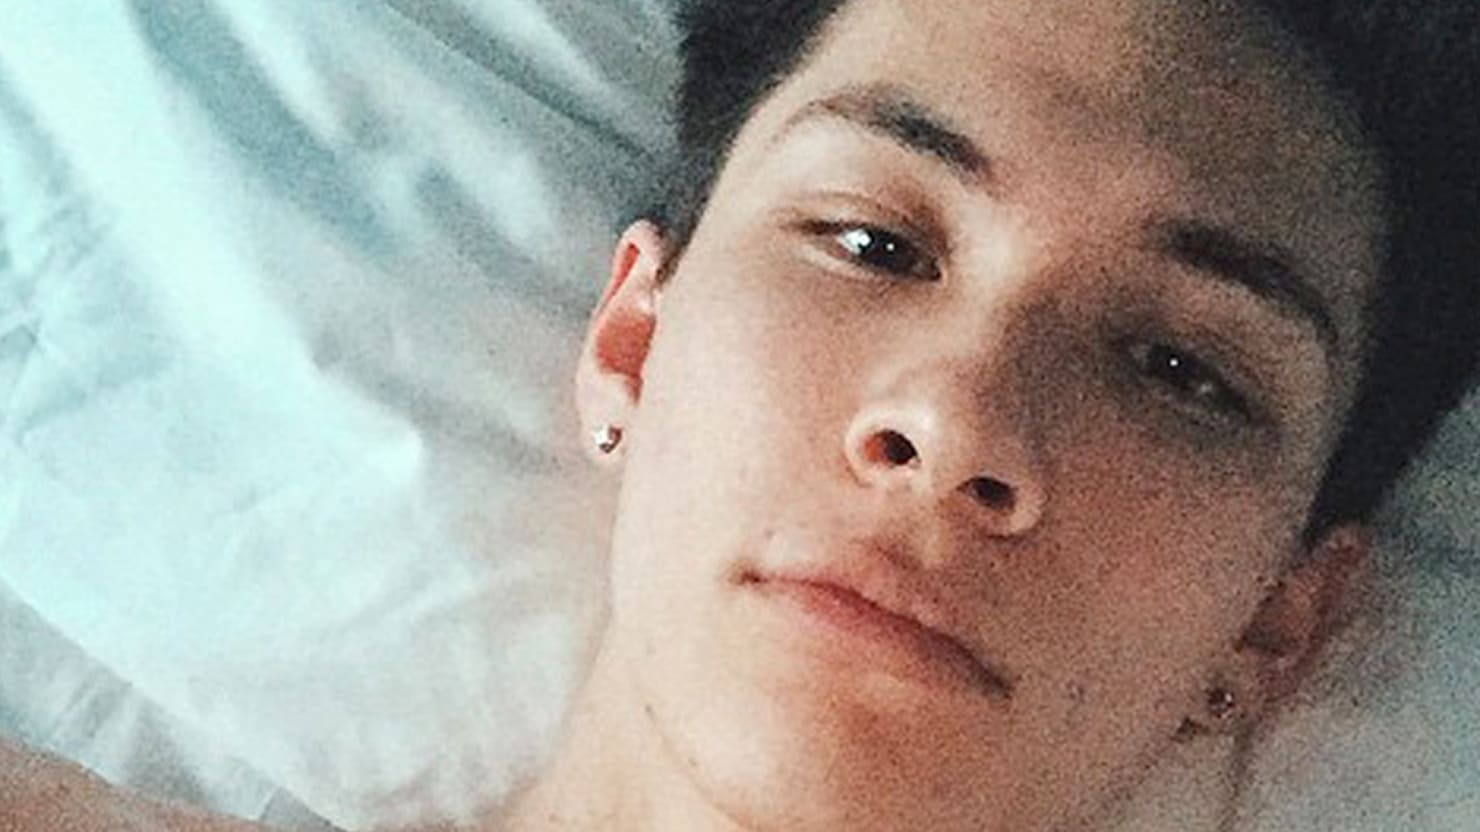 Carter Reynolds, who has over 4.3 million followers on Vine, appeared in a leaked...